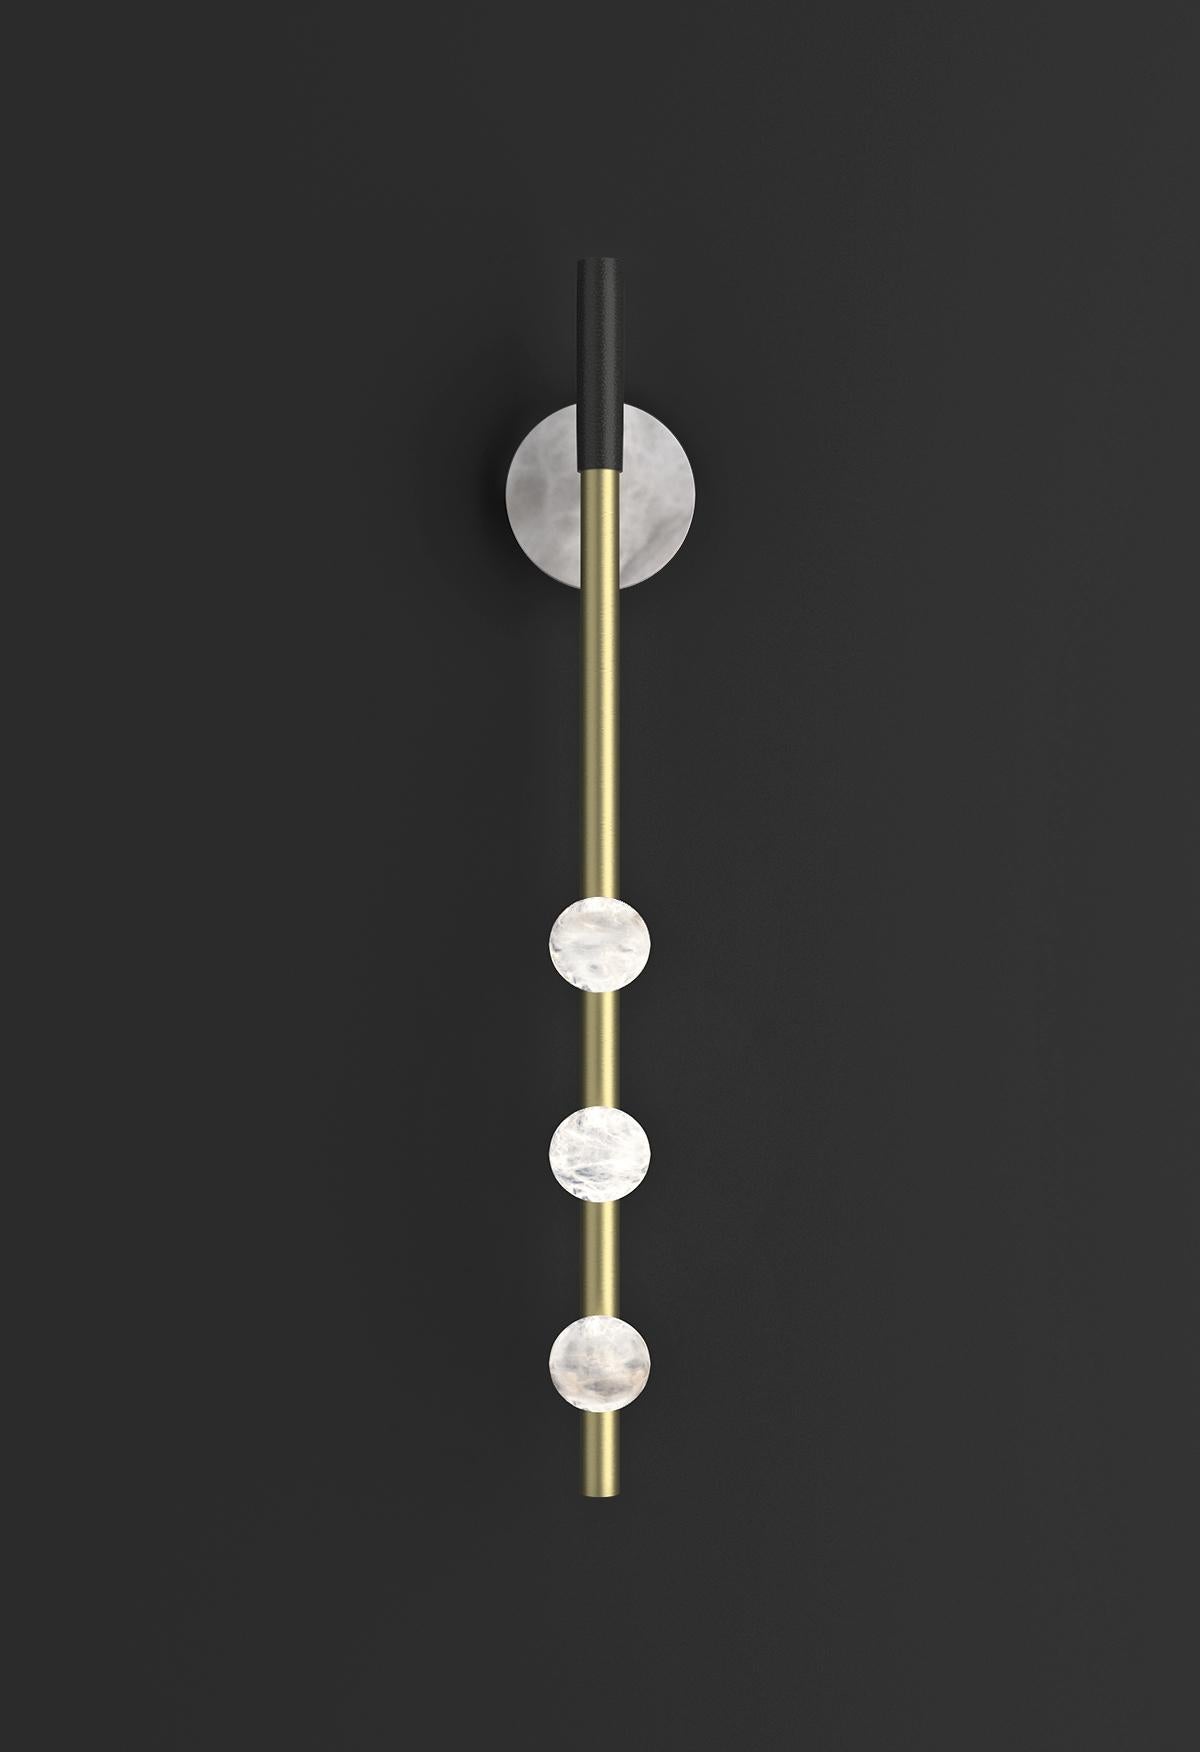 Demetra Brushed Brass Wall Lamp by Alabastro Italiano
Dimensions: D 9 x W 10 x H 60 cm.
Materials: White alabaster, brass and leather.

Available in different finishes: Shiny Silver, Bronze, Brushed Brass, Ruggine of Florence, Brushed Burnished,